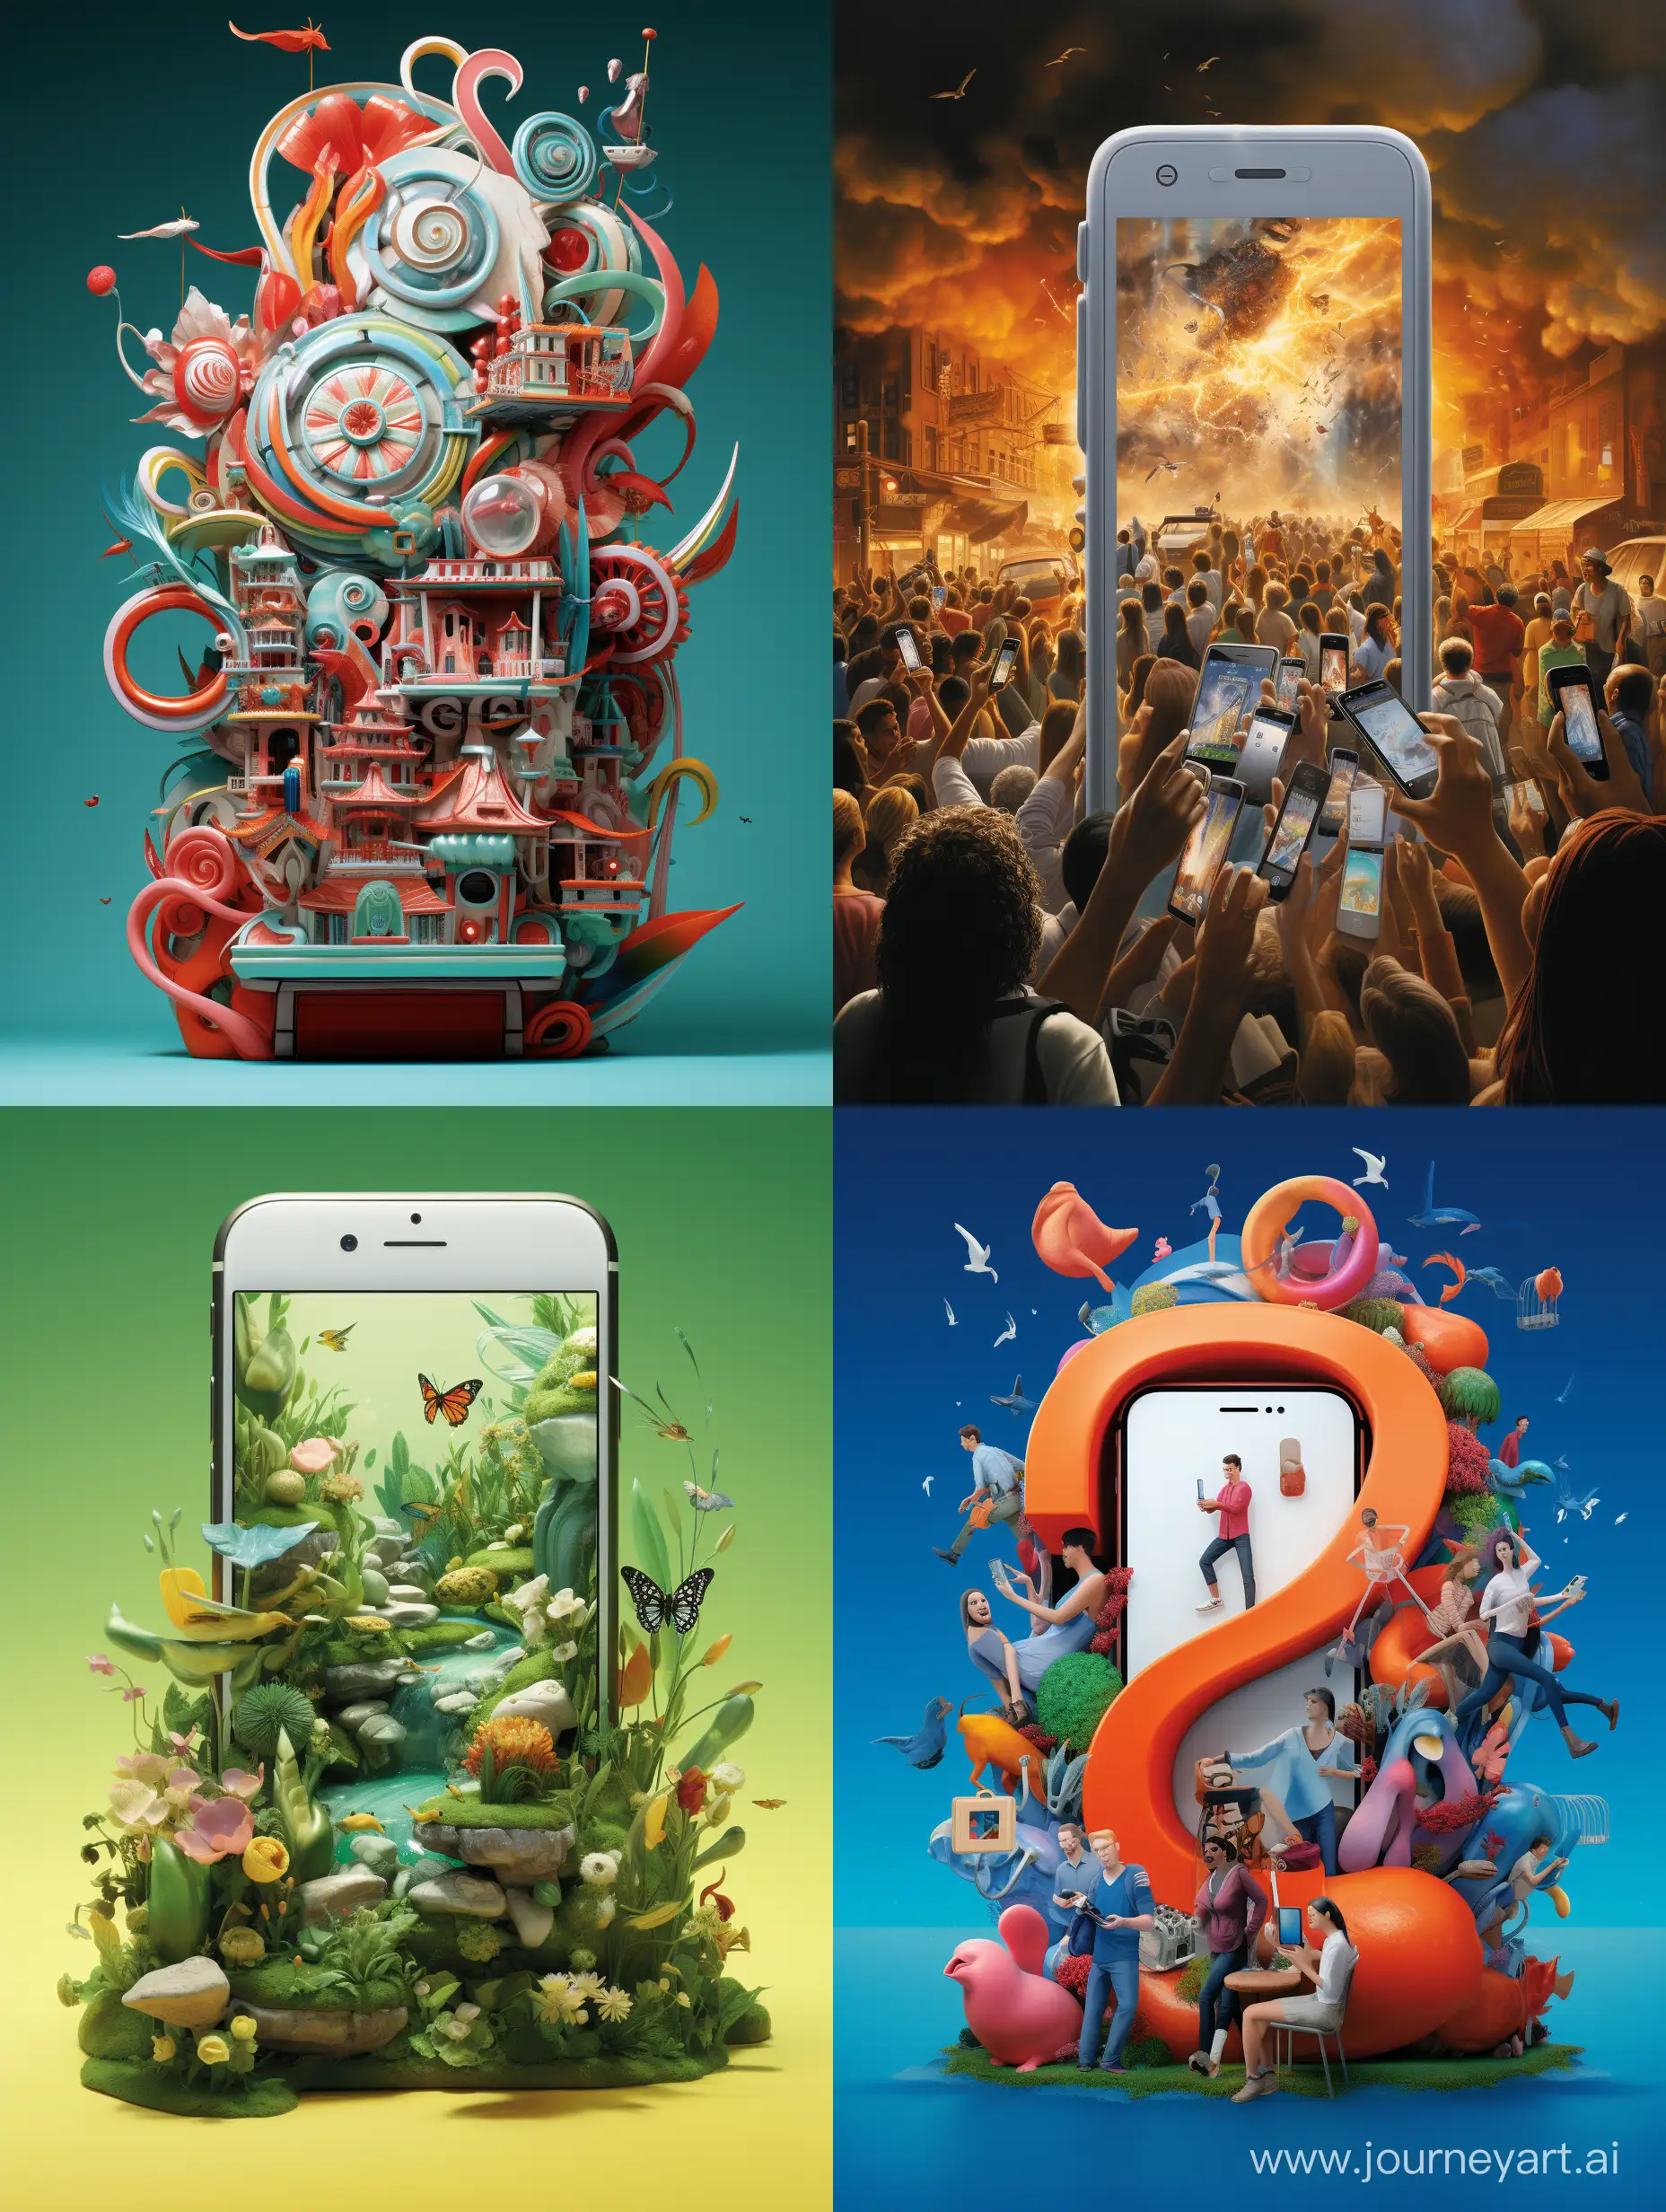 Futuristic-iPhone-20-Augmented-Reality-Advertisement